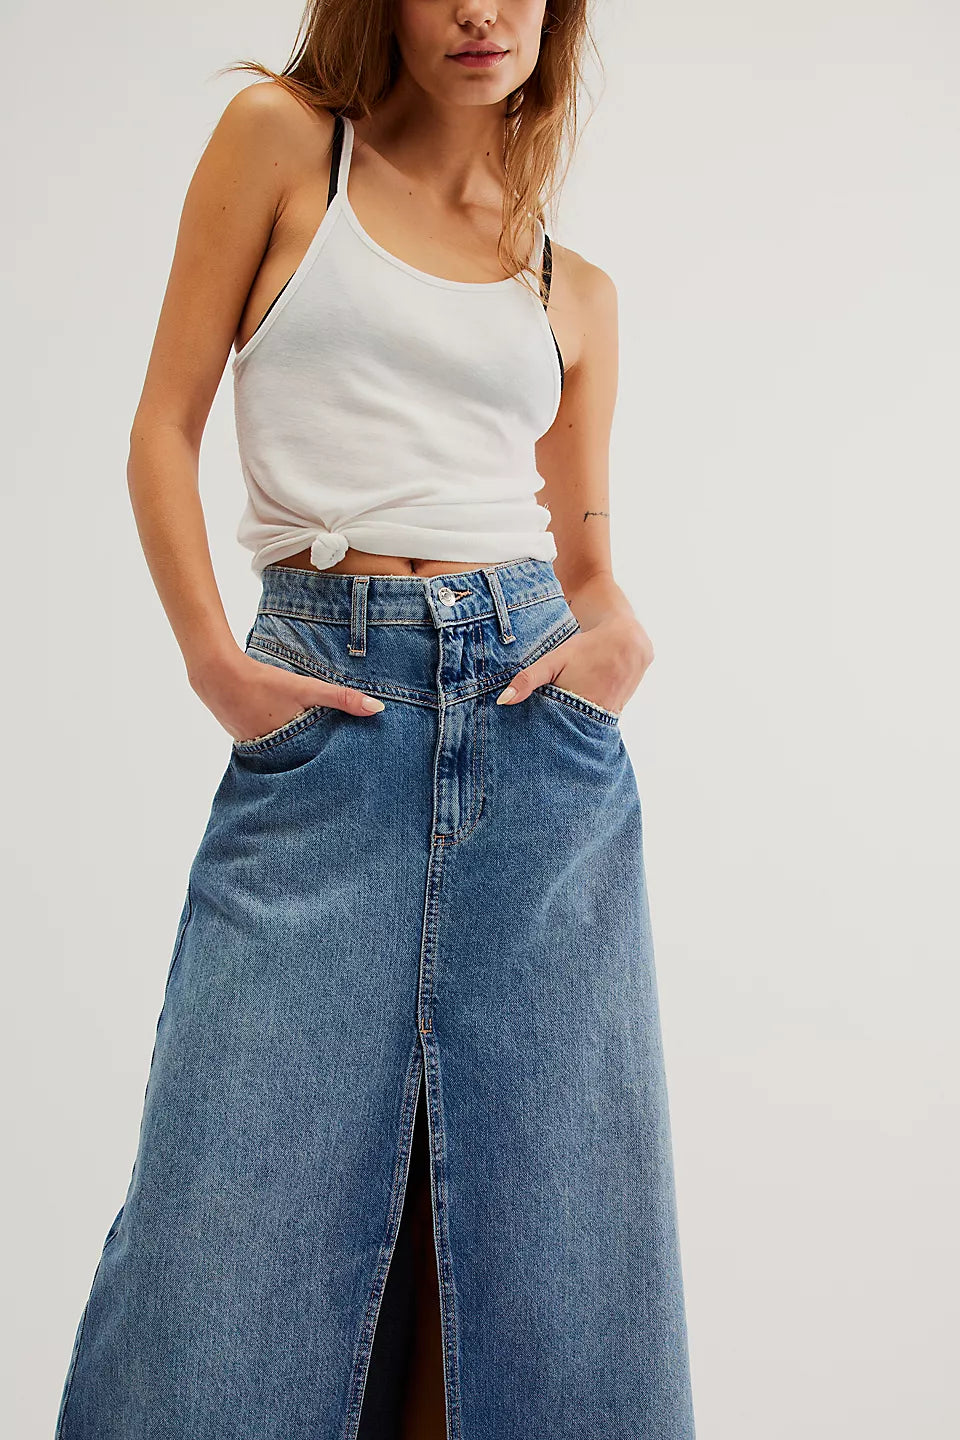 Free people come as you are denim maxi skirt